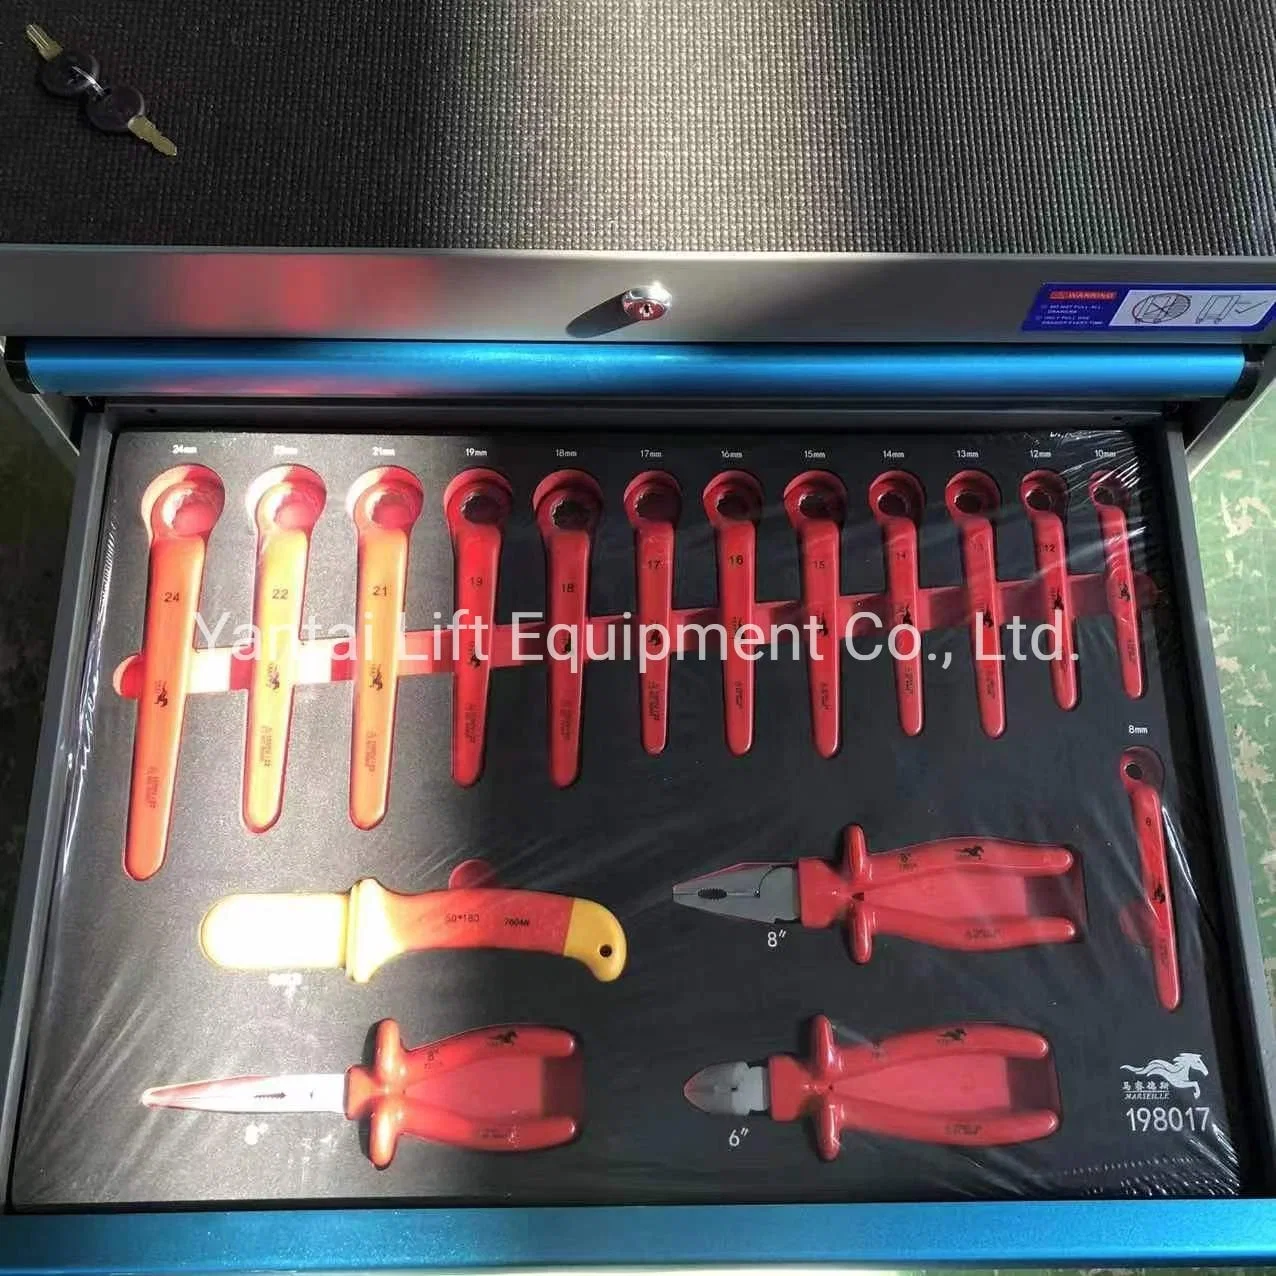 New Energy Tools/Insulated Tools/Hand Tool/Tool/Insulated Pliers/Hardware Tools/Utility Vehicle/Trolley/Wheels/Wheel Barrow/Hand Truck/	Garage Equipment